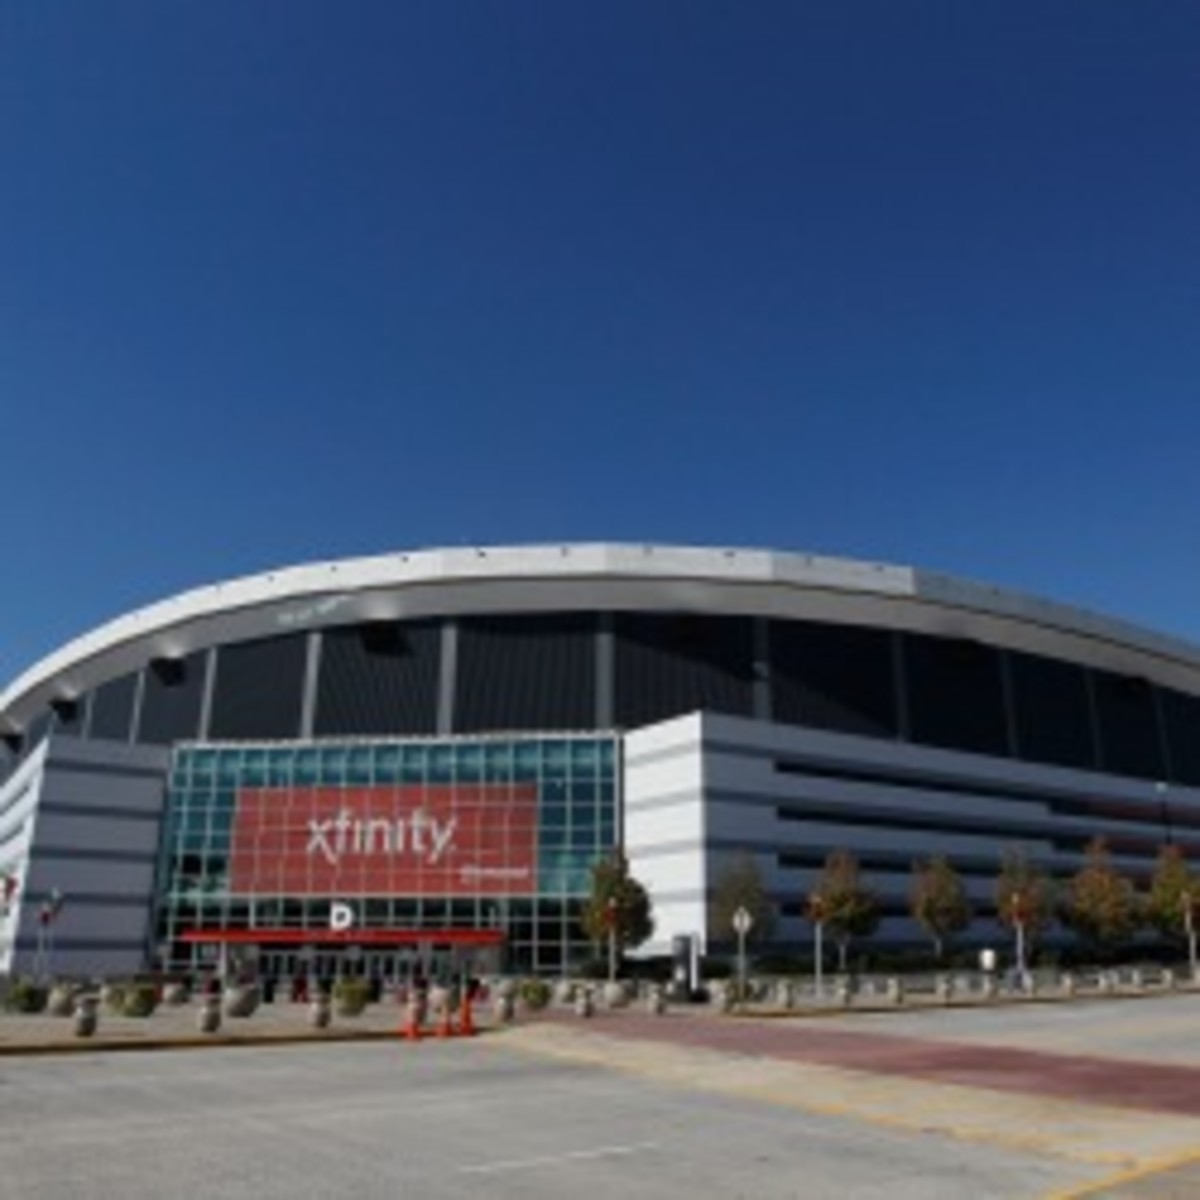 The Atlanta Falcons want a new stadium but are hitting political snags. (Kevin C. Cox/Getty Images)